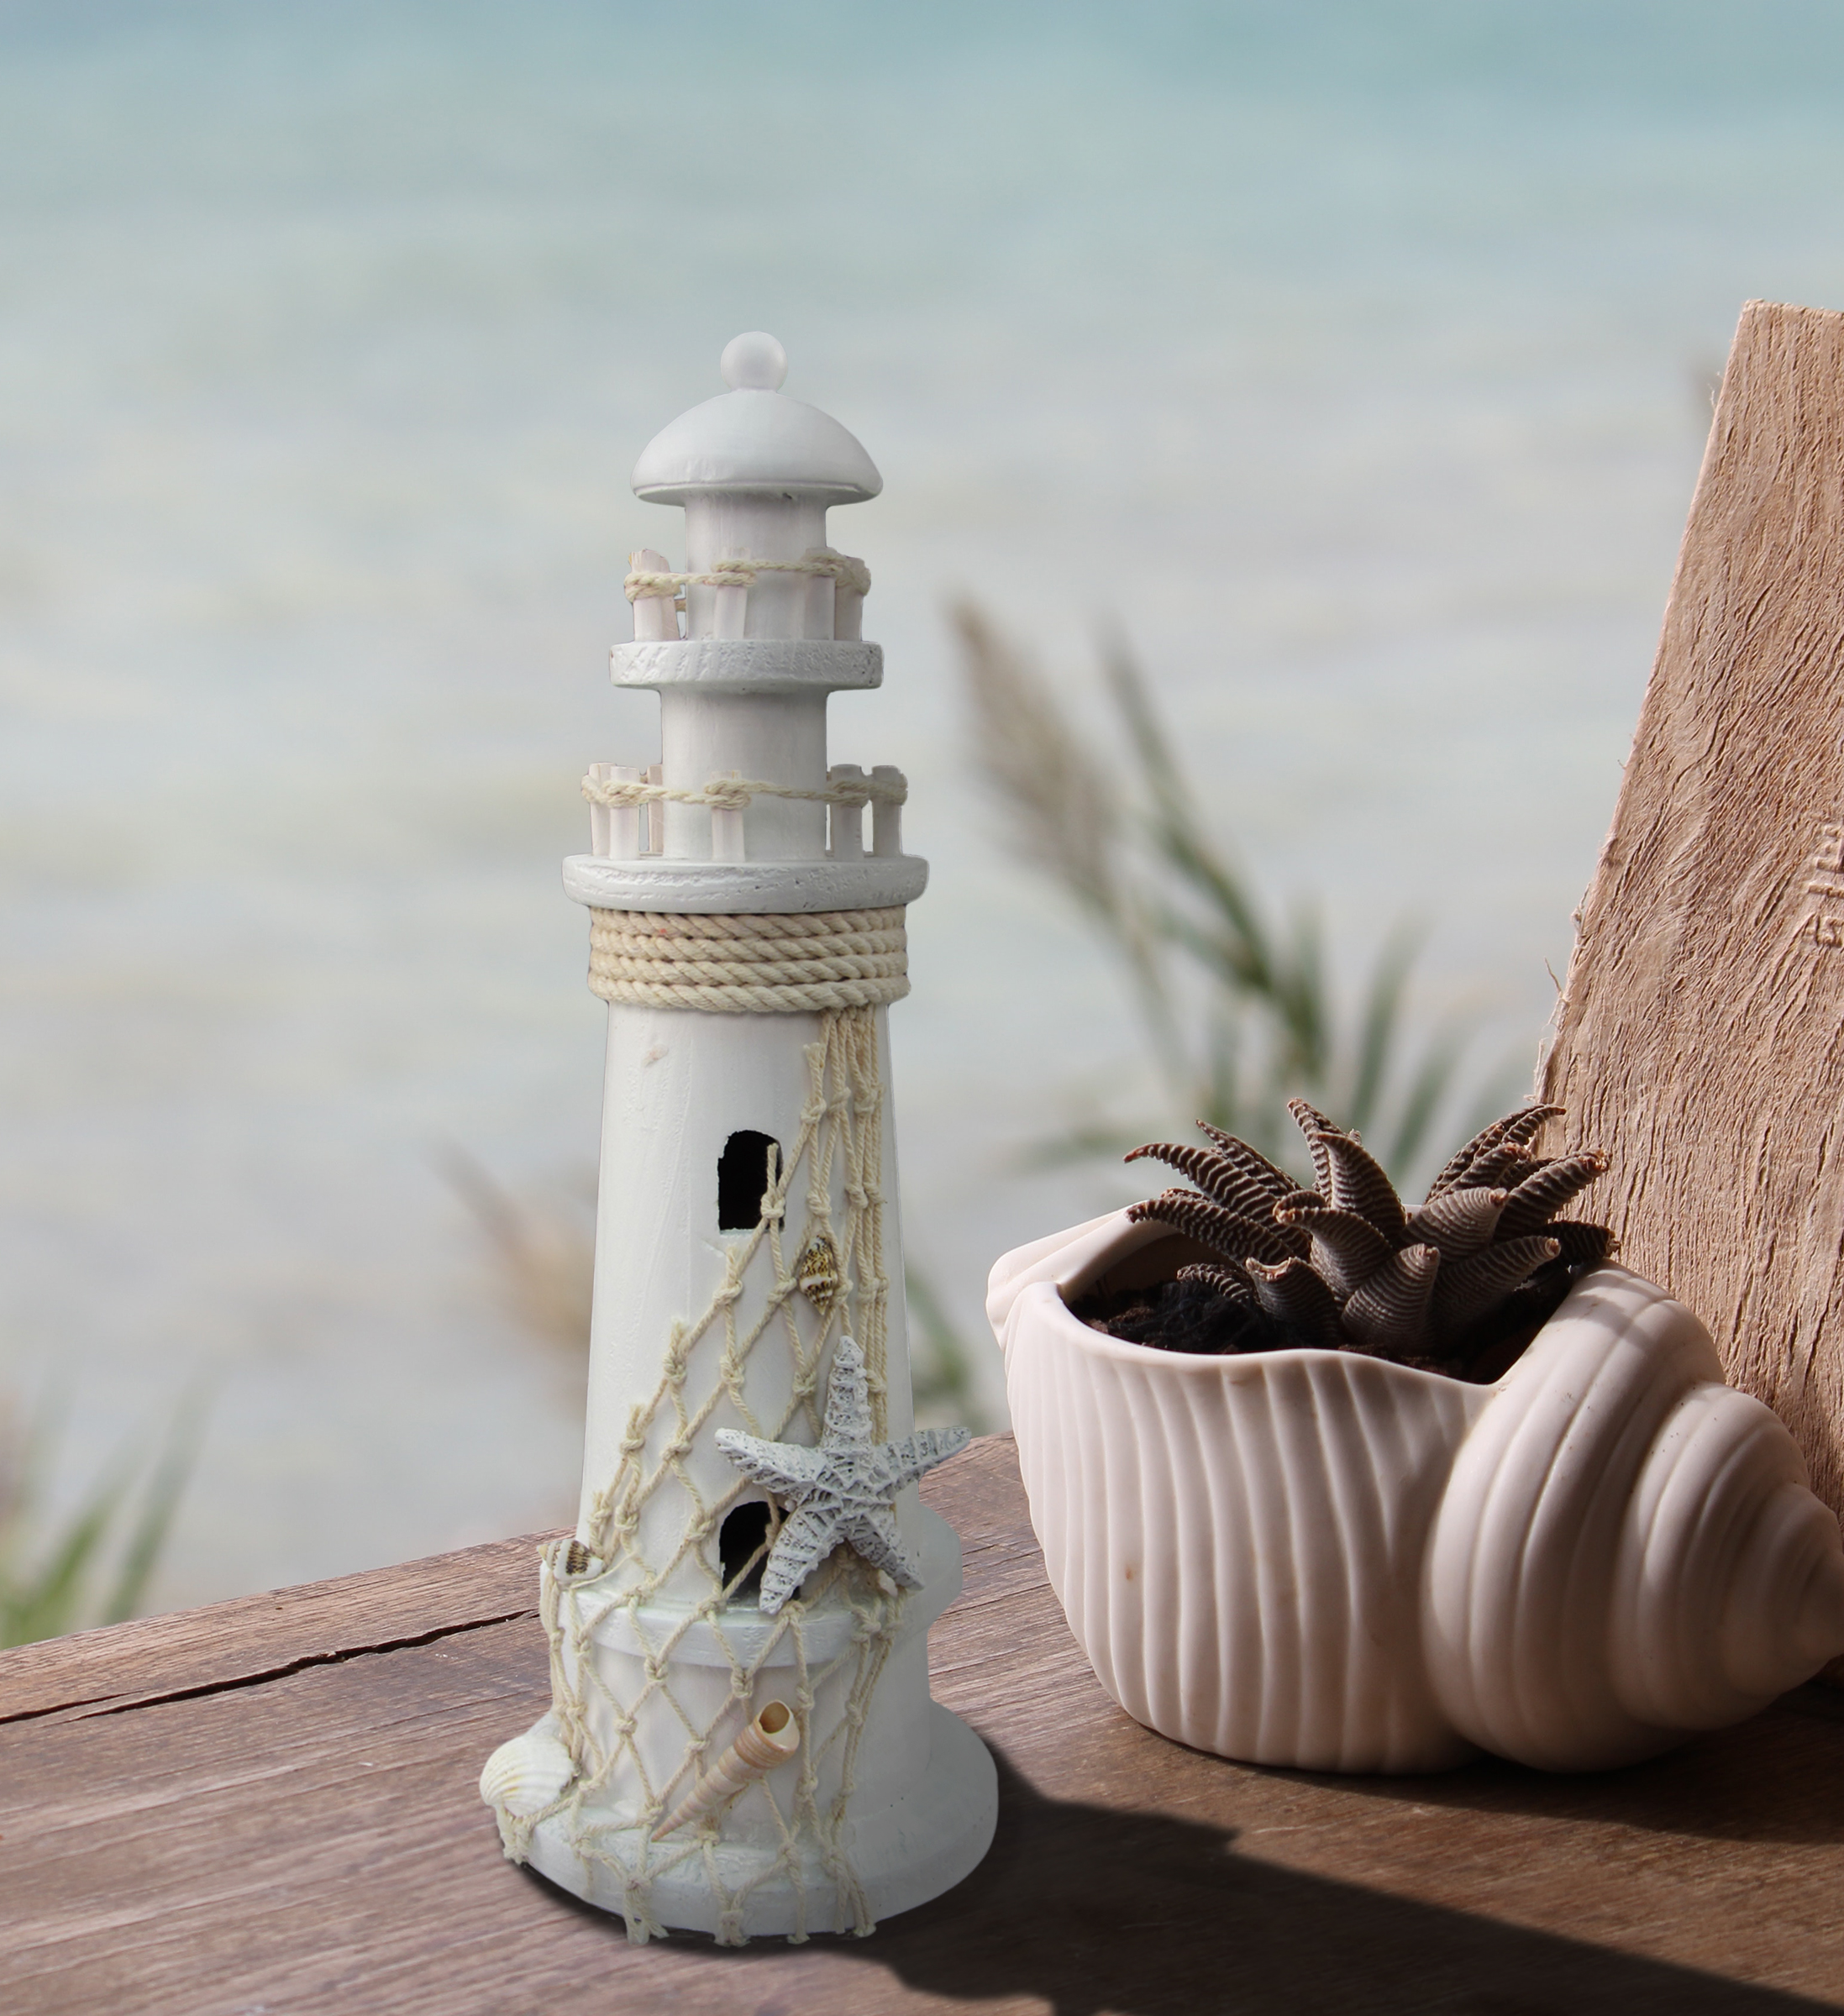 CoTa Global White Lighthouse Decor with Starfish and Fish Net - On